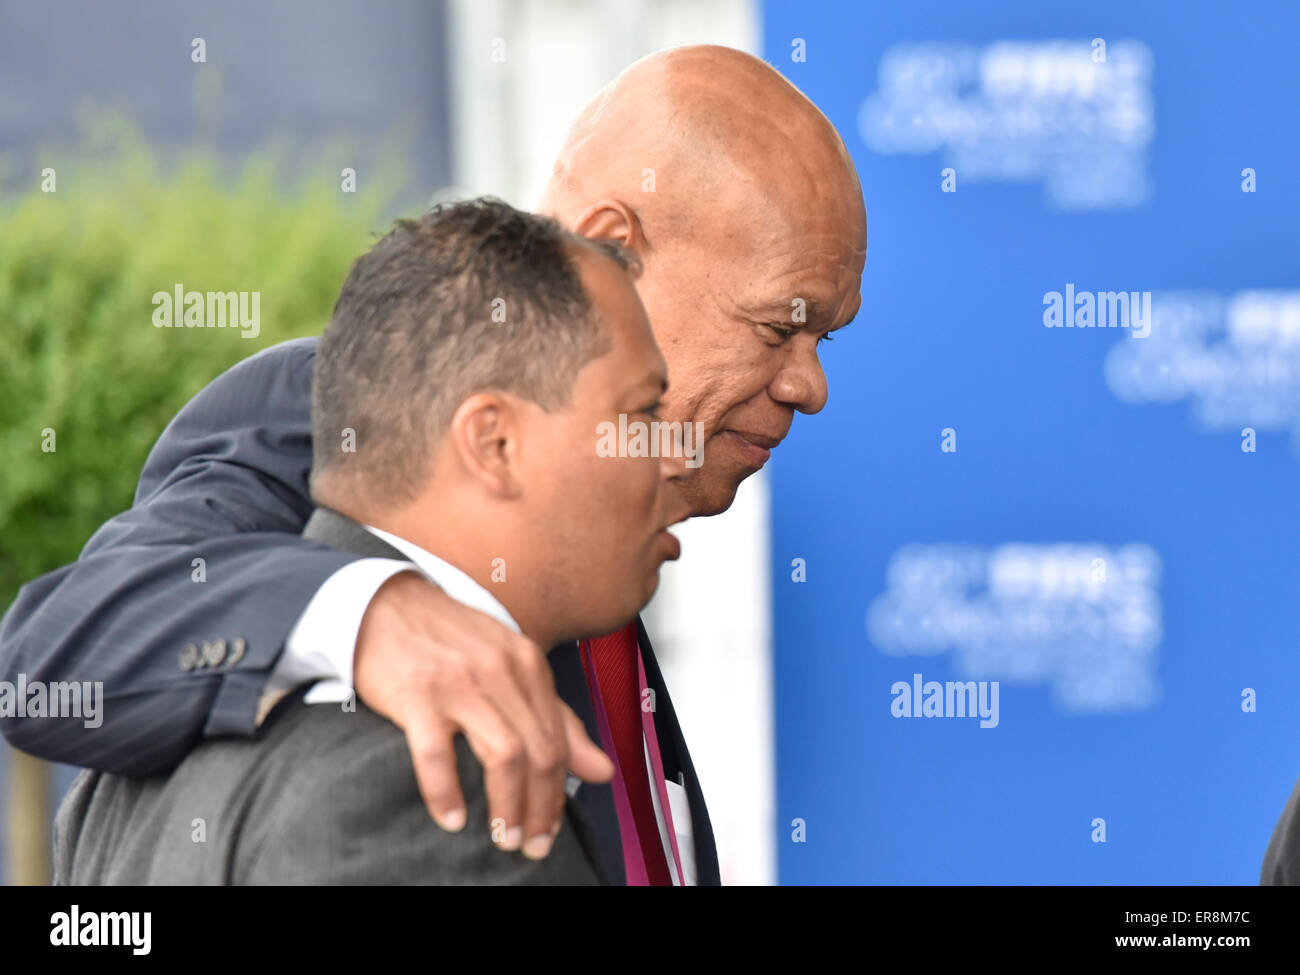 Zurich, Switzerland. 29th May, 2015. FIFA delegate Rignaal FRANCISCA (Curacao) puts his hand on the shoulder of a fellow FIFA delegate during his arrival at Zurich Hallenstadion for the 2015 FIFA congress. Credit:  thamerpic/Alamy Live News Stock Photo